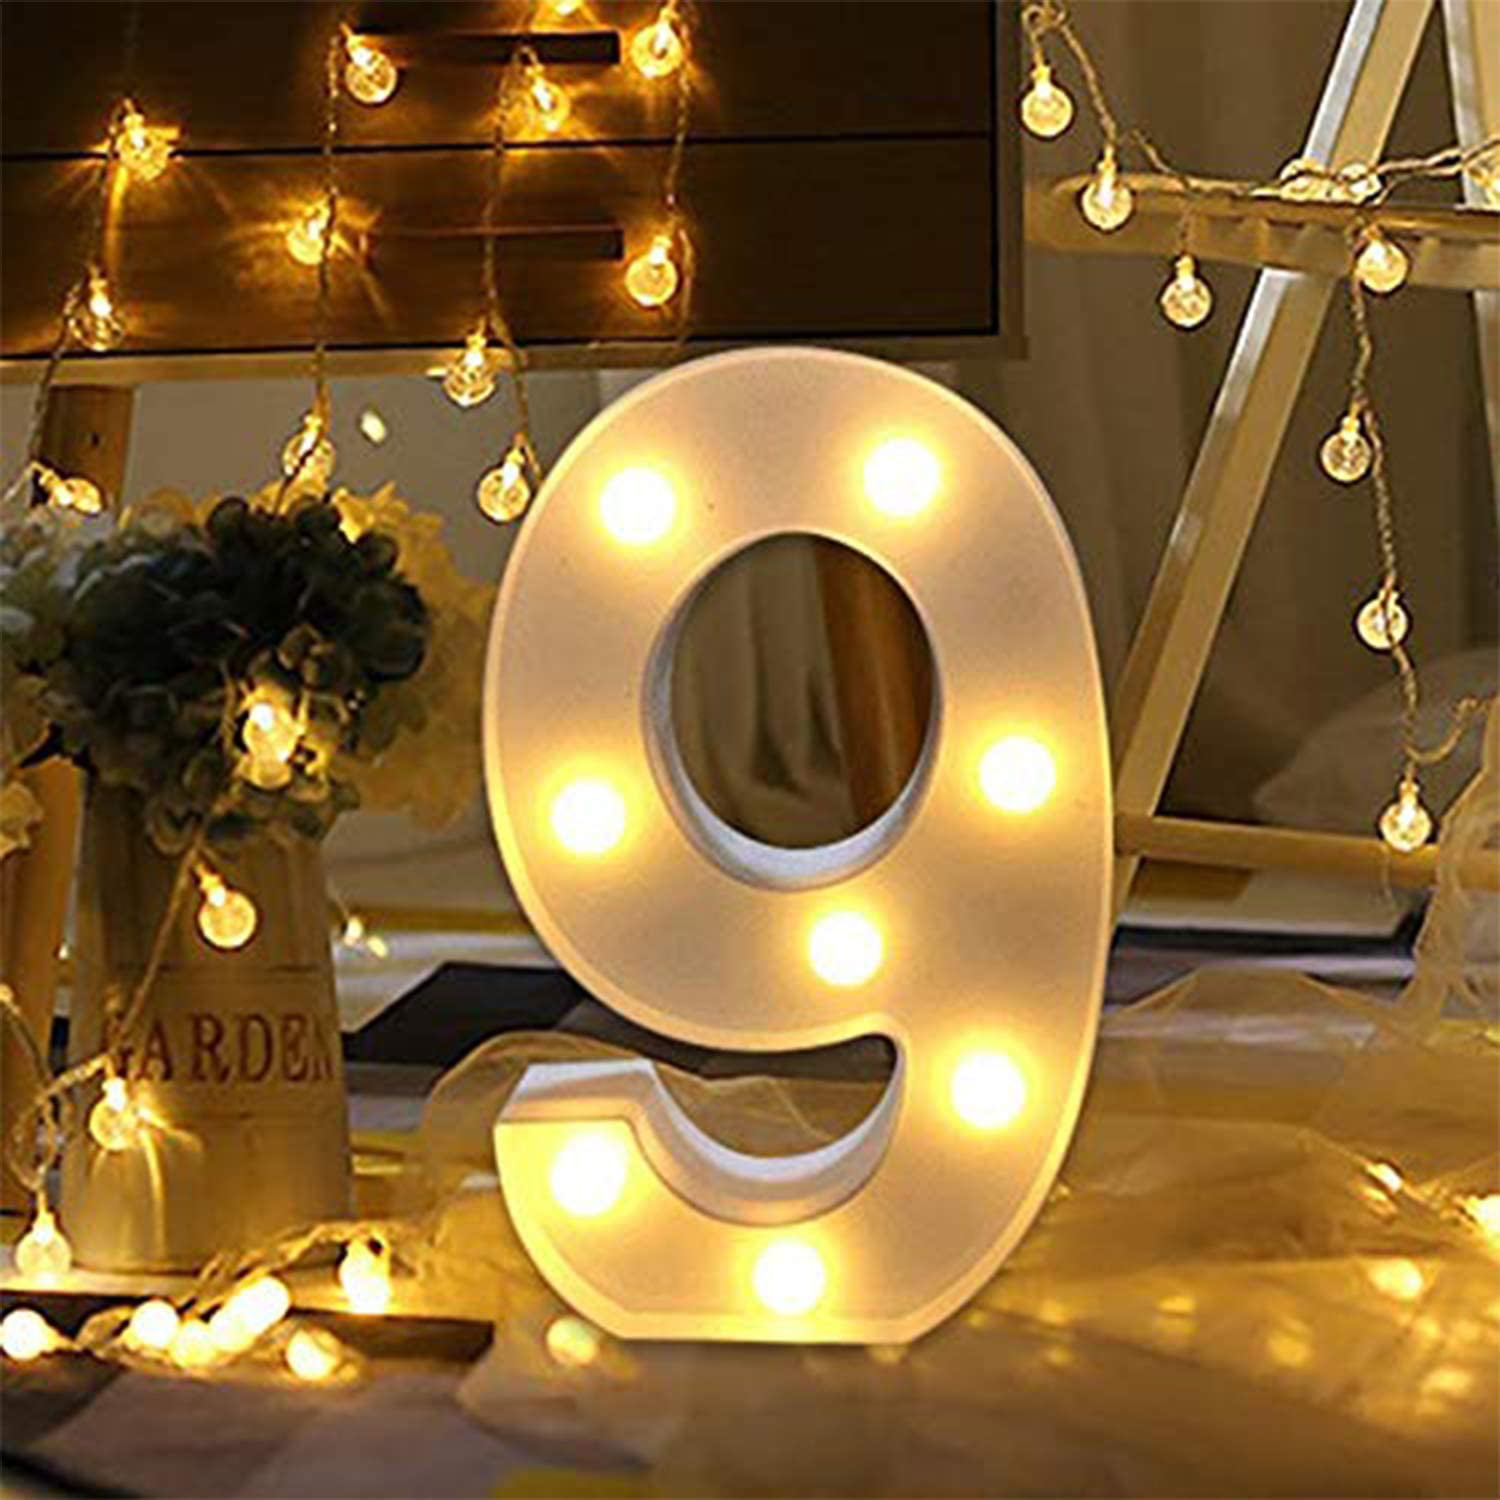 0-9 Number Figure 3D LED Lights Night Light Wedding Party Wall Lamps Home Decors 